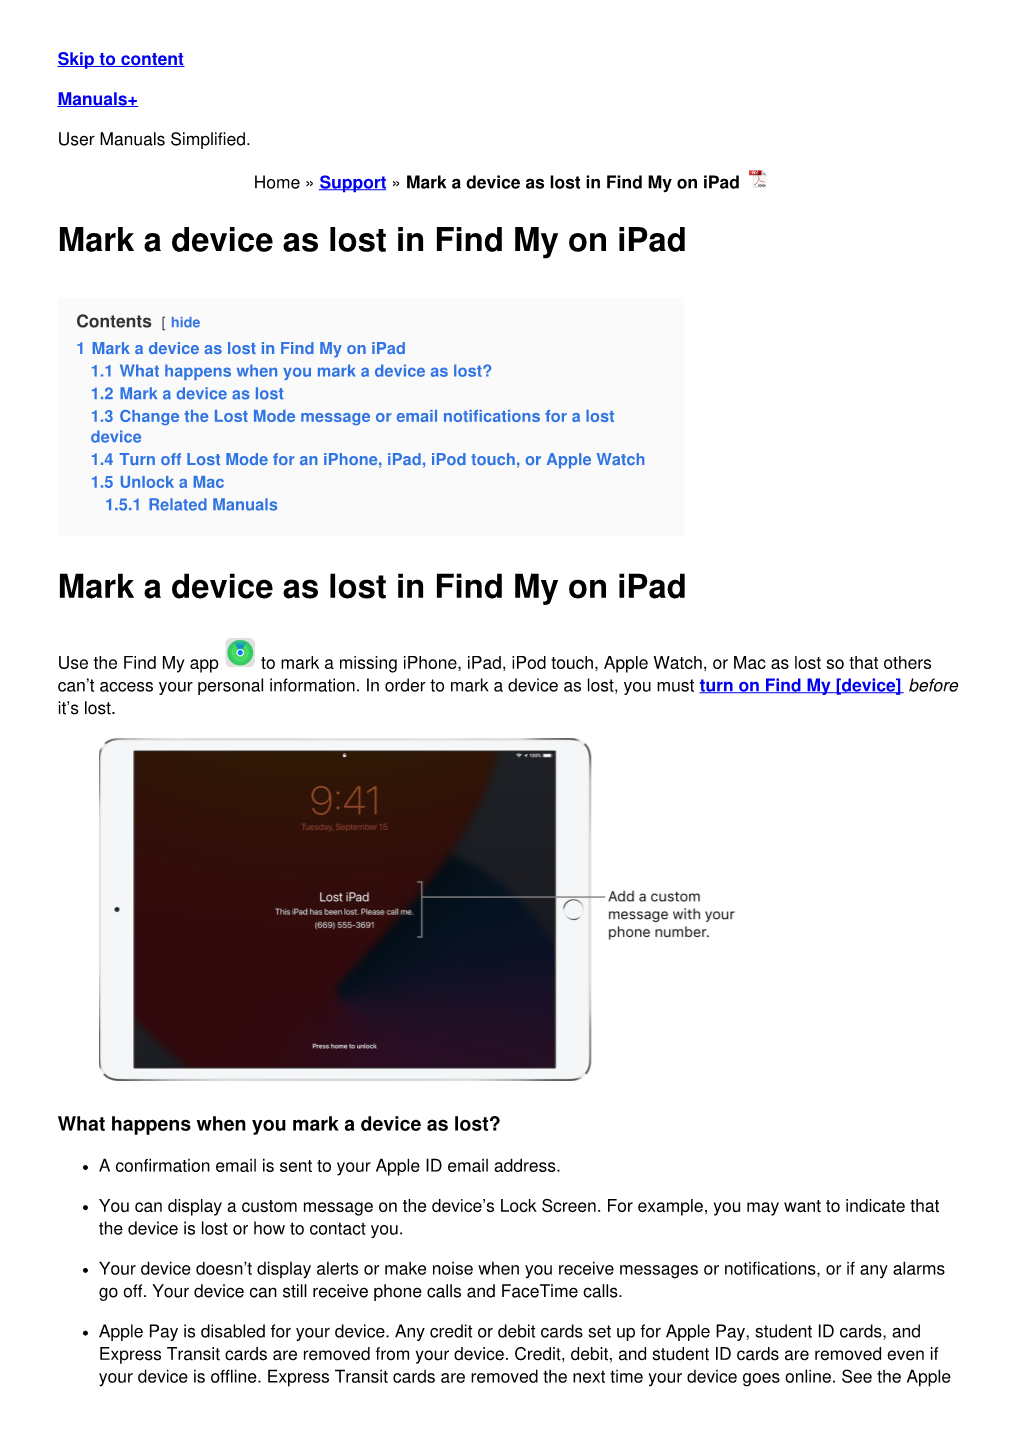 Mark a Device As Lost in Find My on Ipad